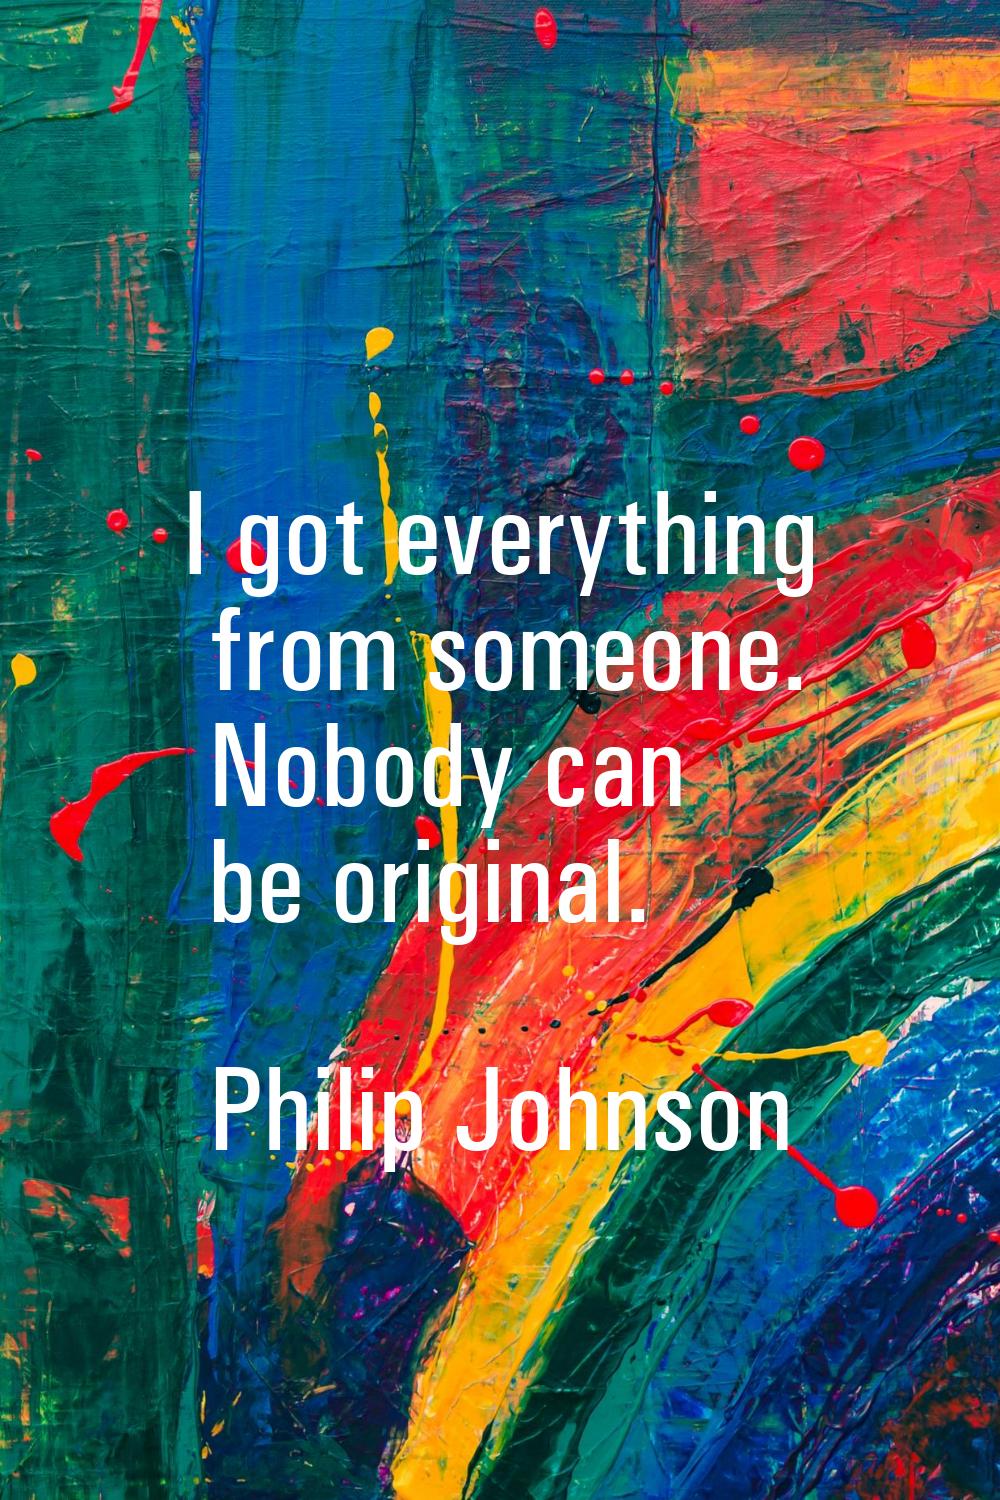 I got everything from someone. Nobody can be original.